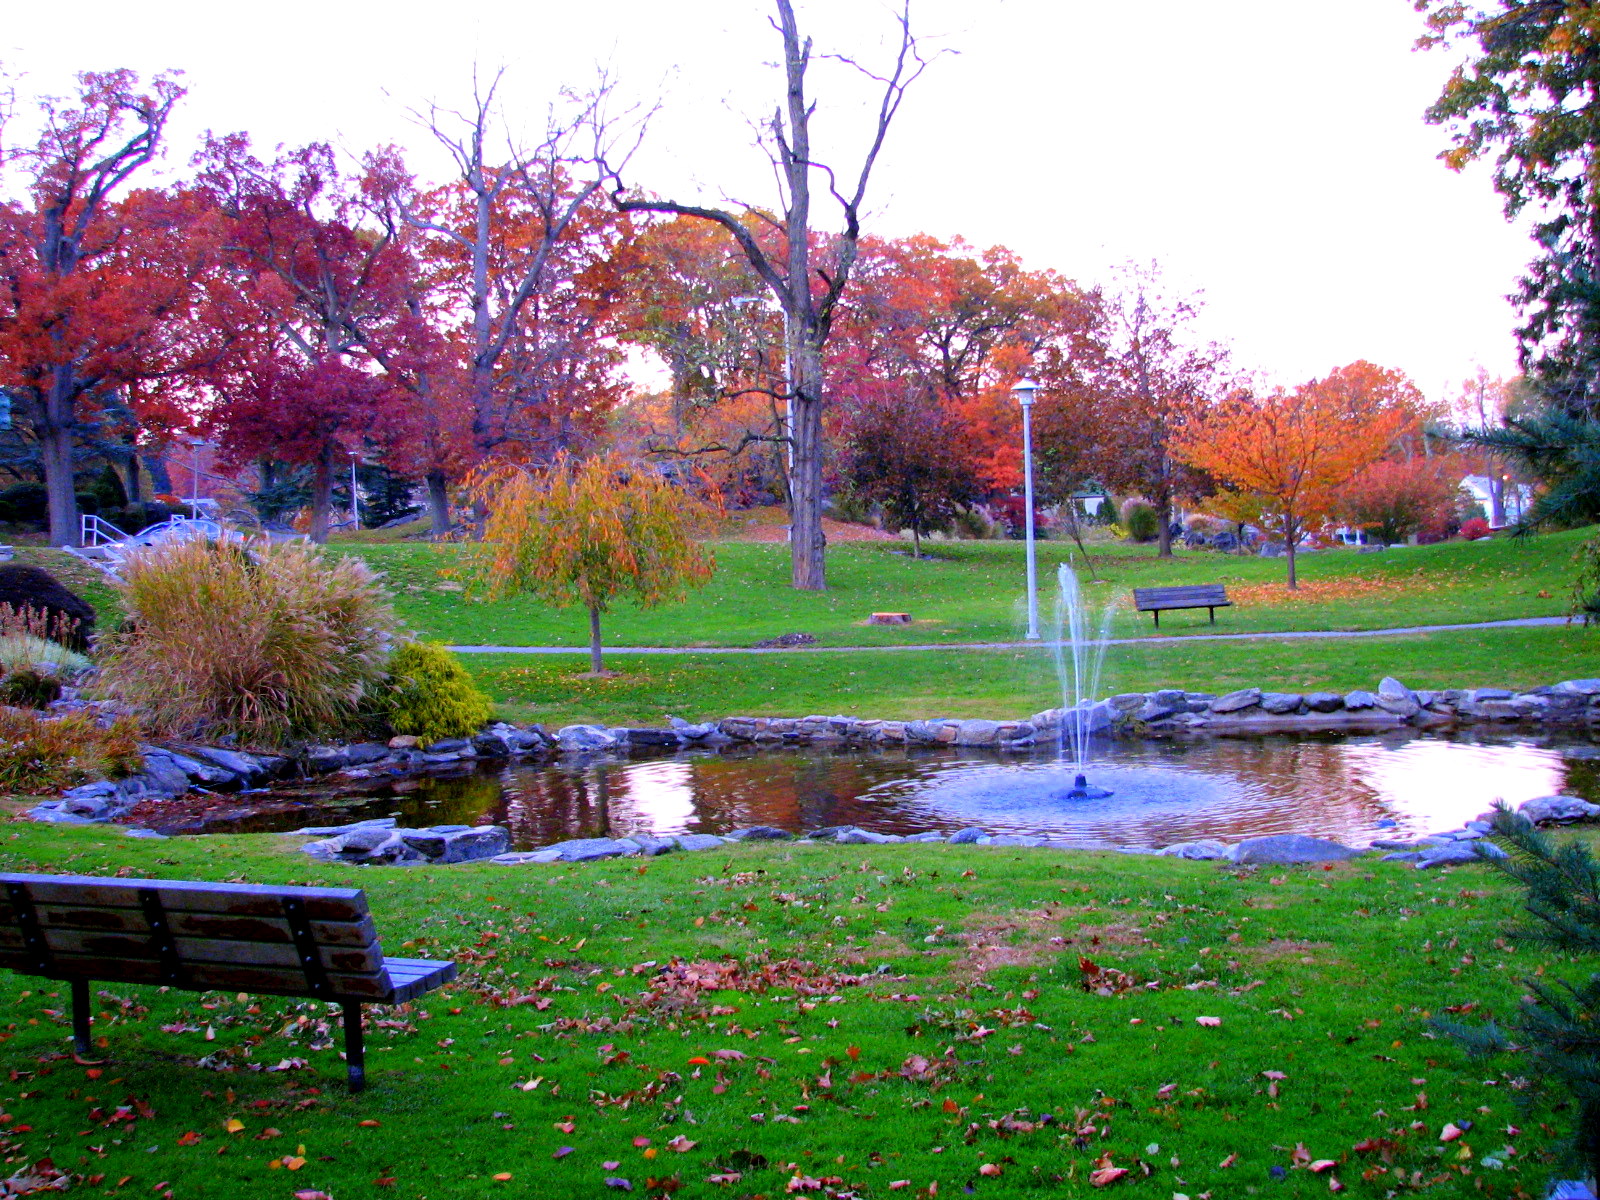 a small pond in a park with benches